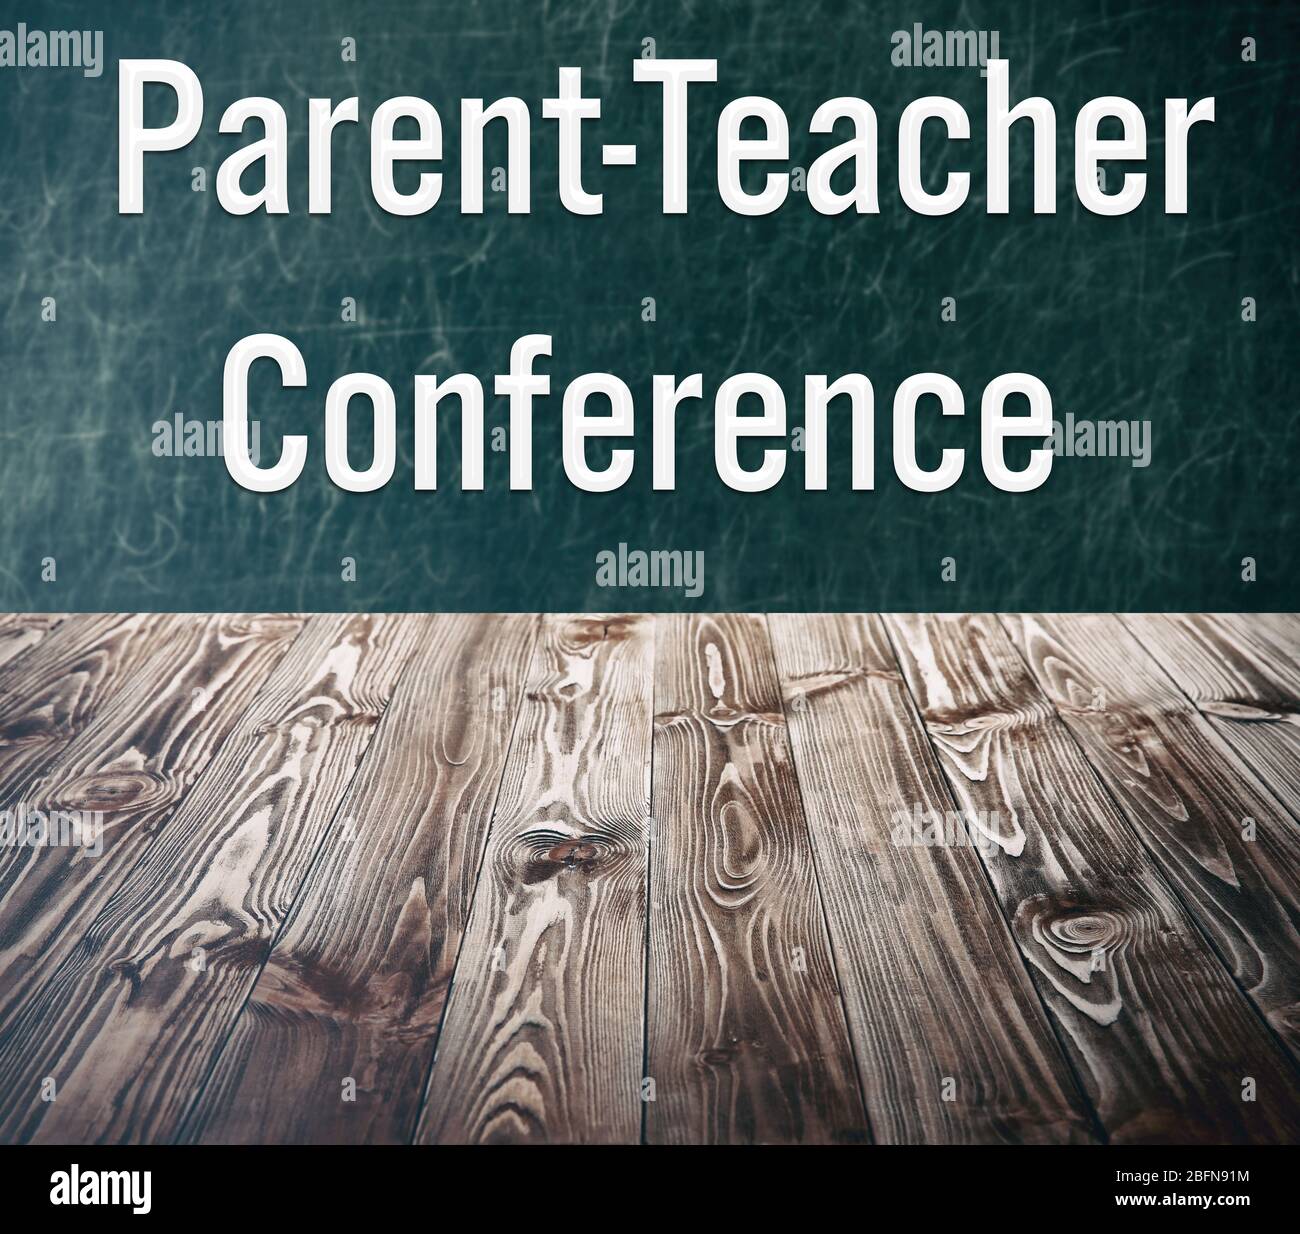 Wooden table against chalkboard. Text PARENT-TEACHER CONFERENCE on background. School concept. Stock Photo